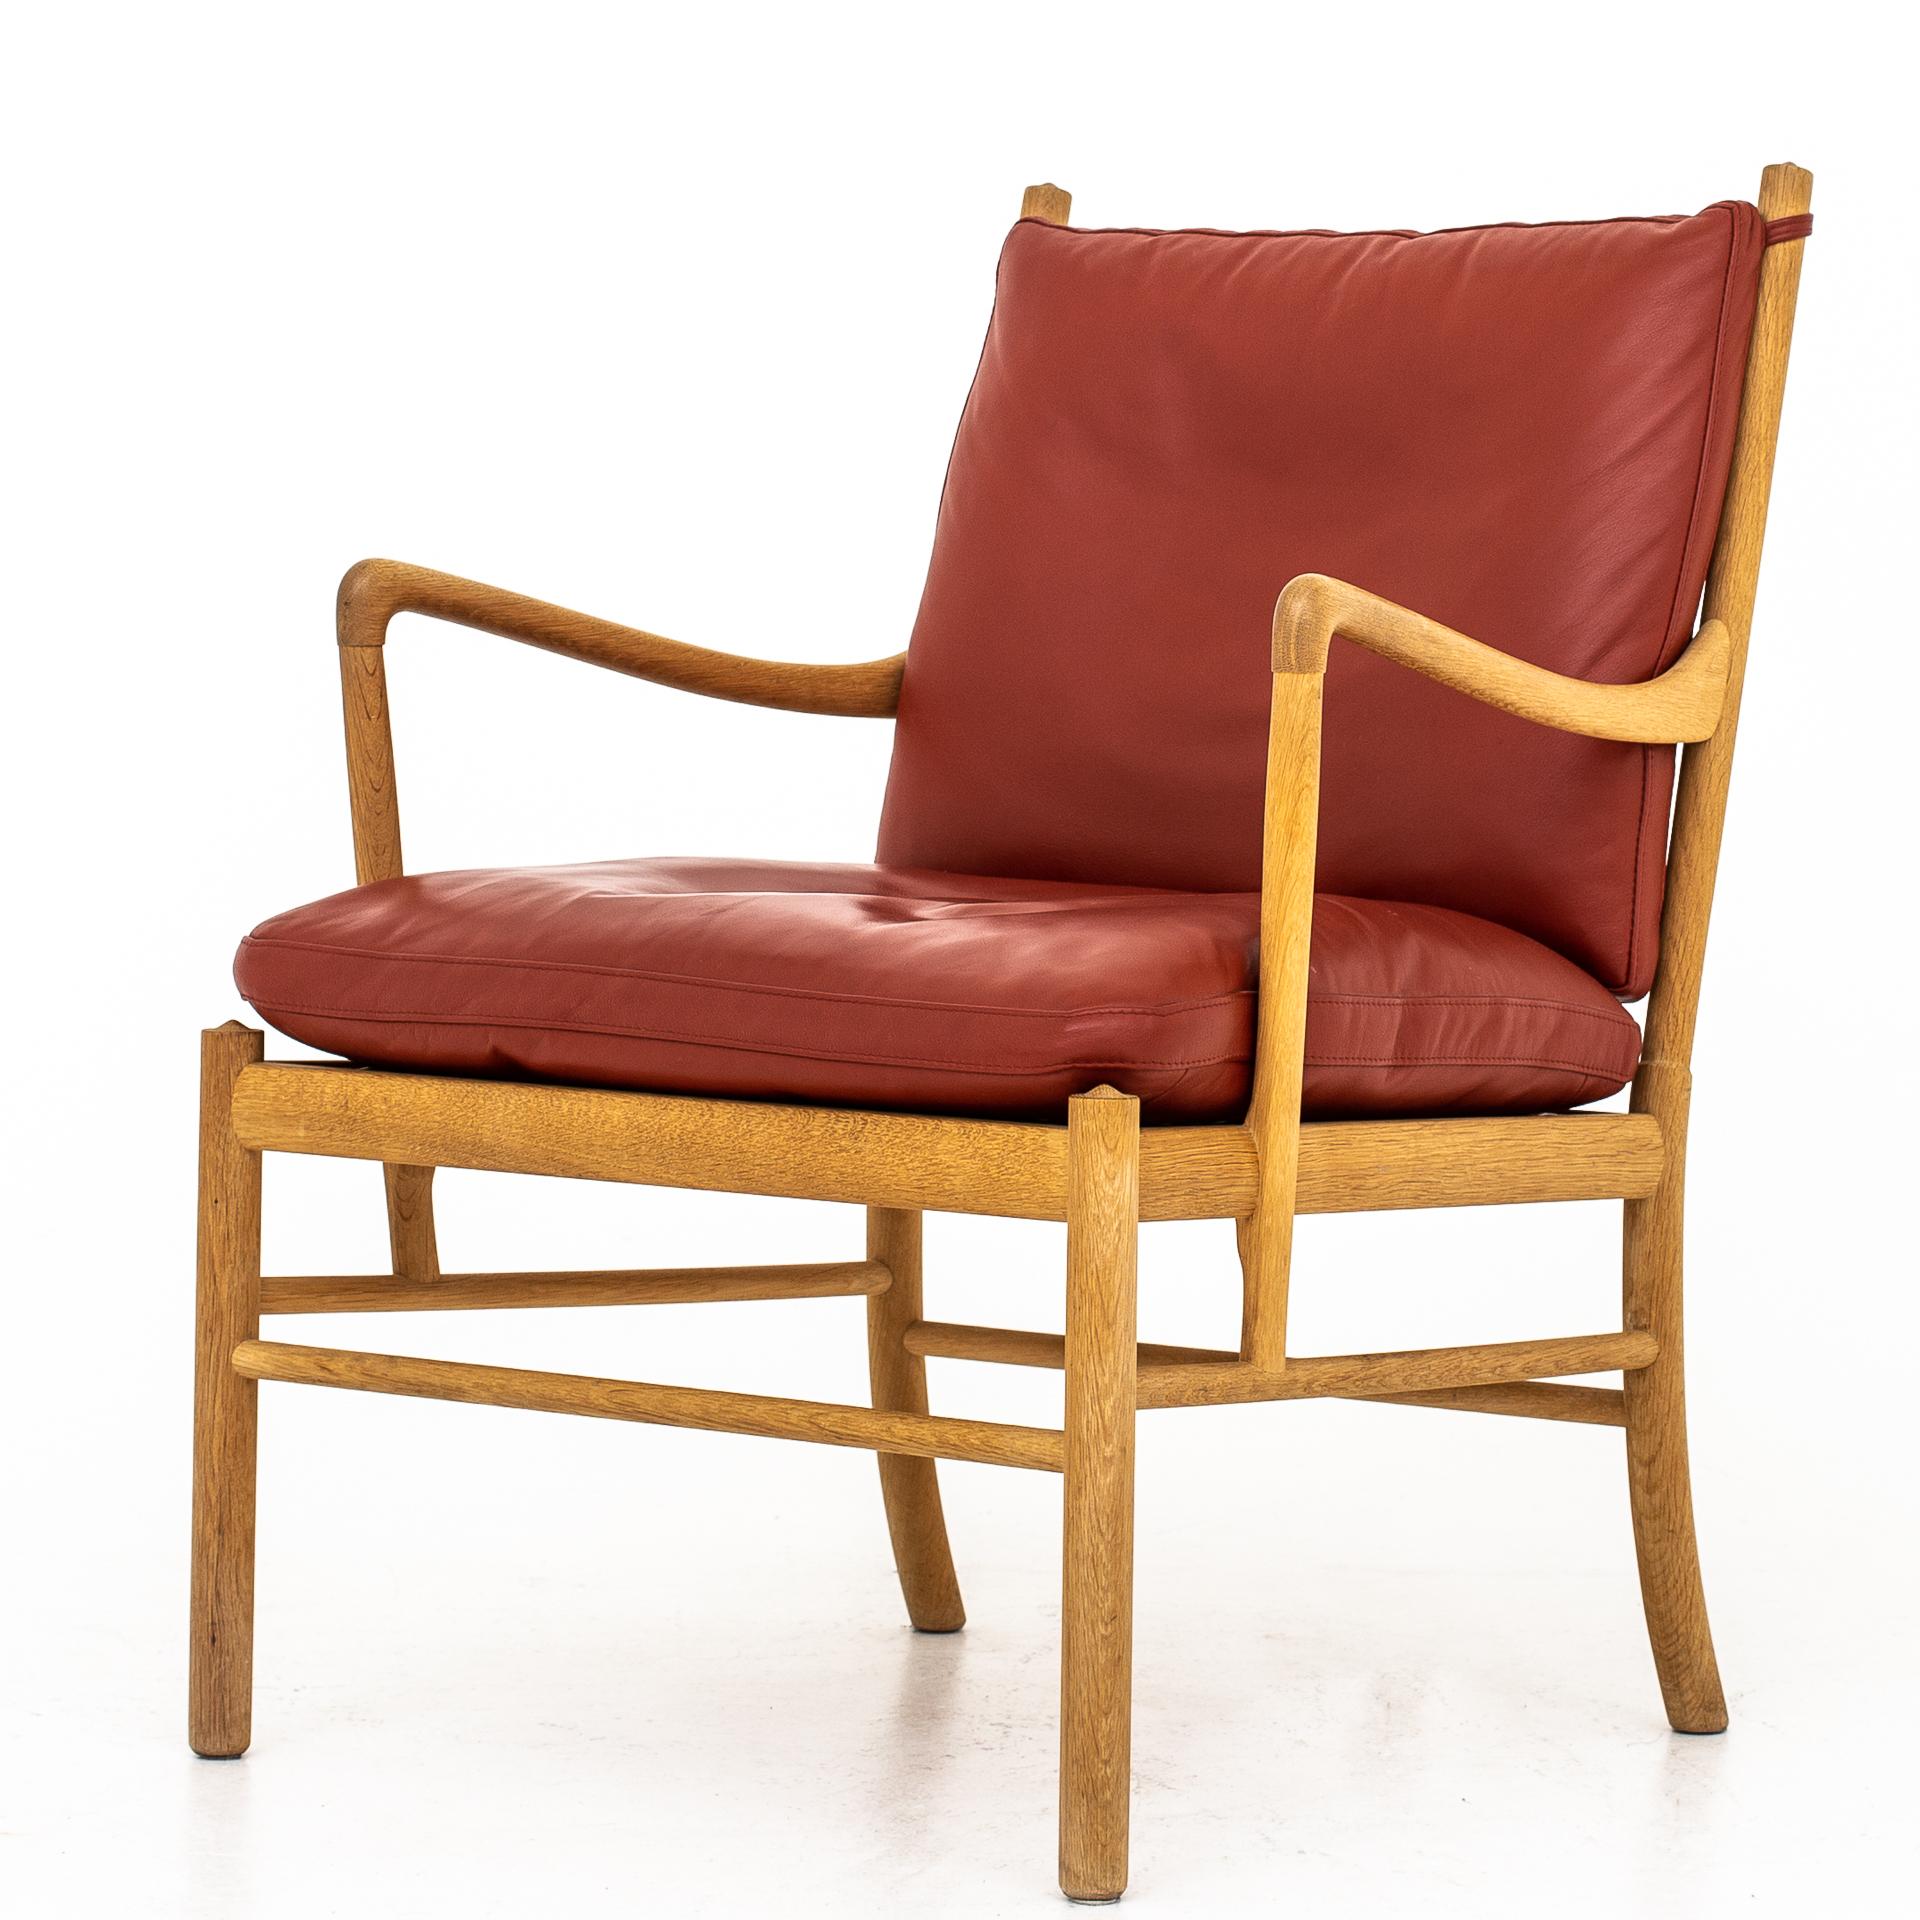 Set of 2 PJ 149 - Colonial chairs in oak and cushions in original red leather. Maker PJ Furniture.